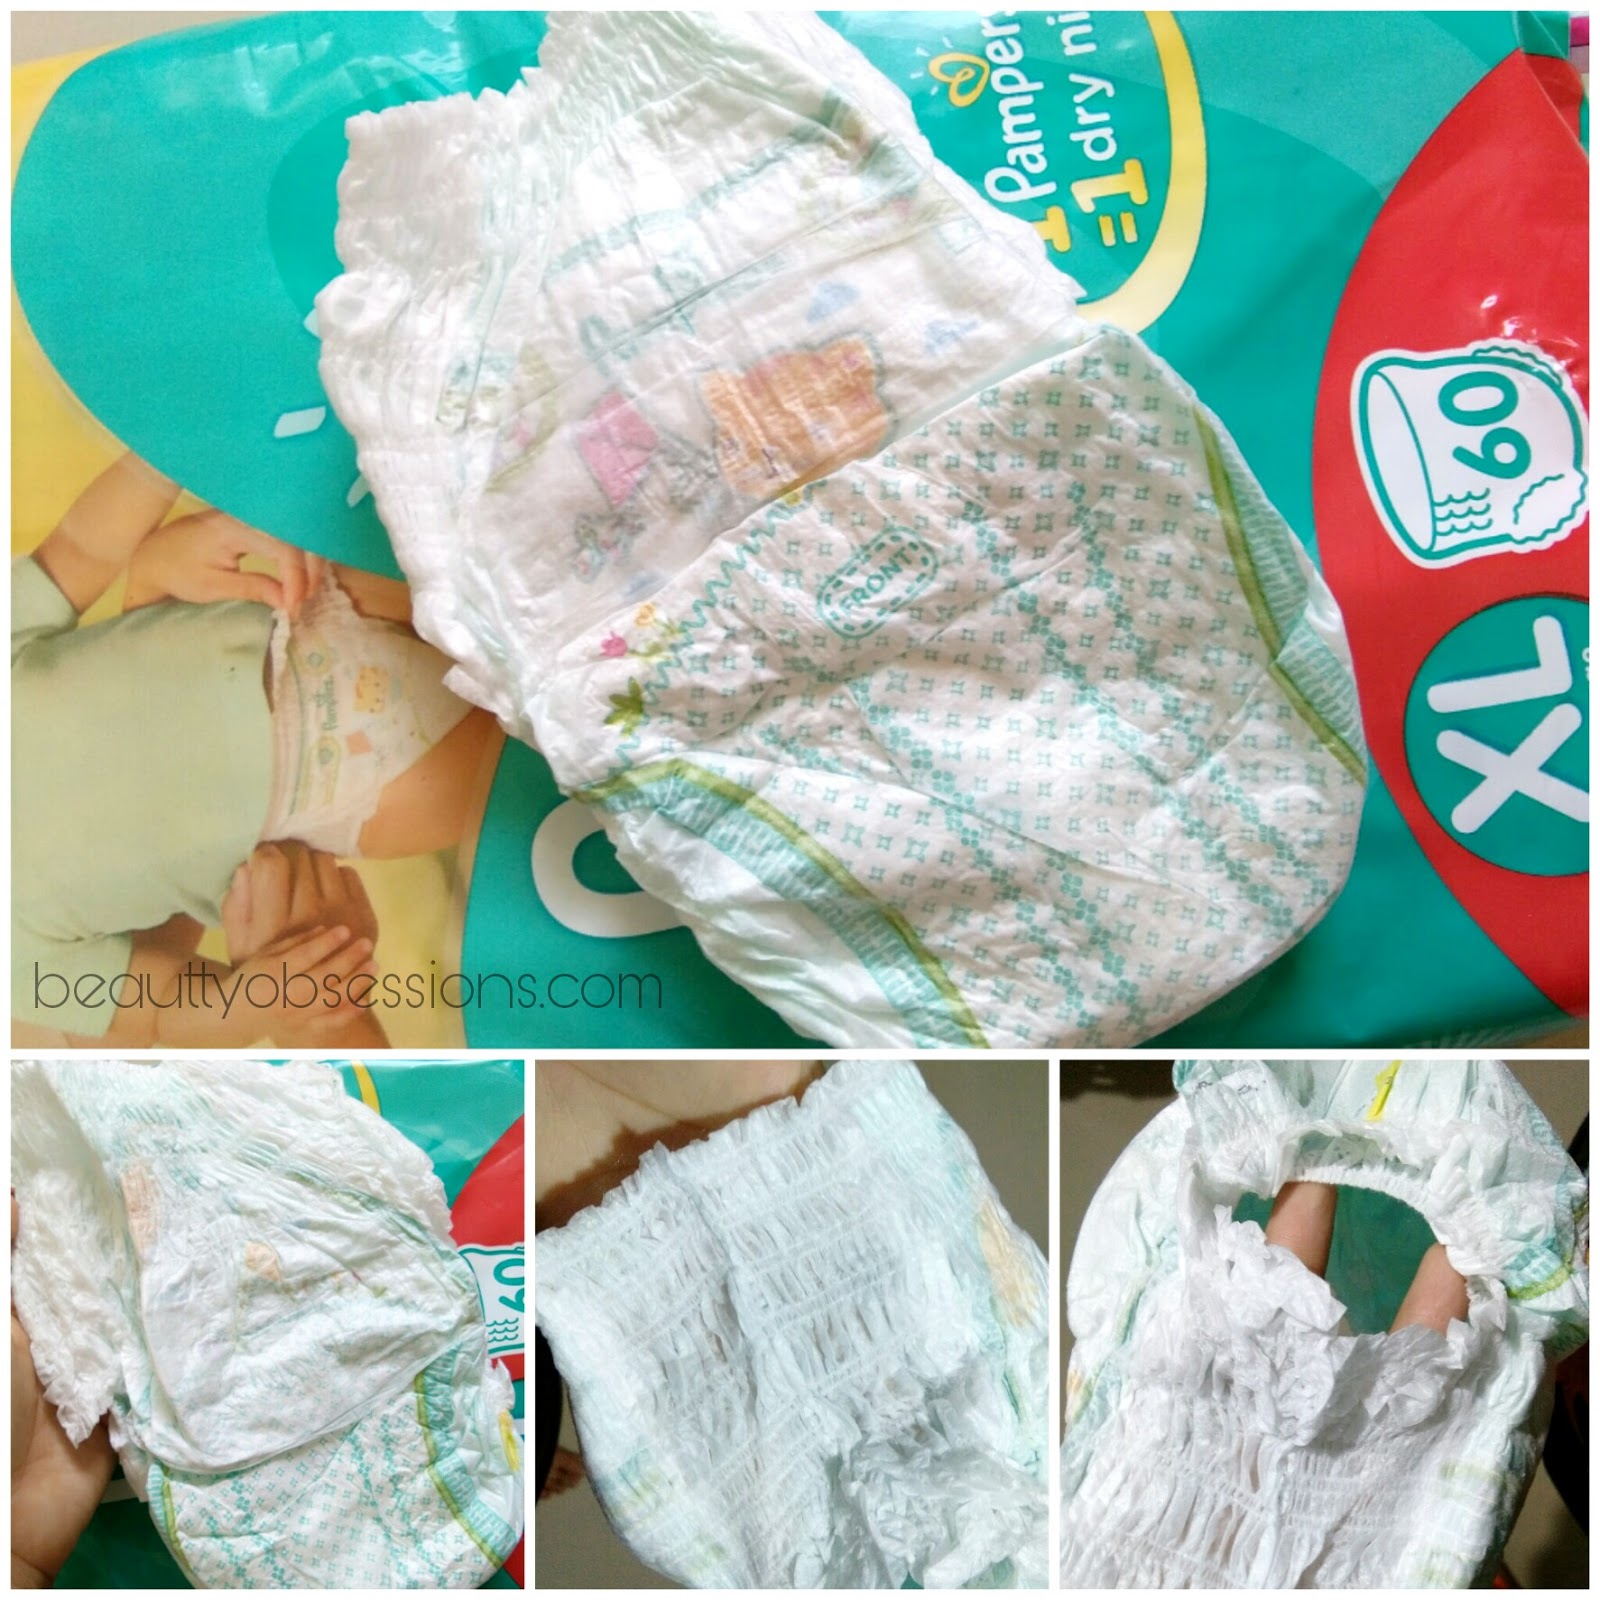 PAMPERS AIRCON PANTS | Review - YouTube